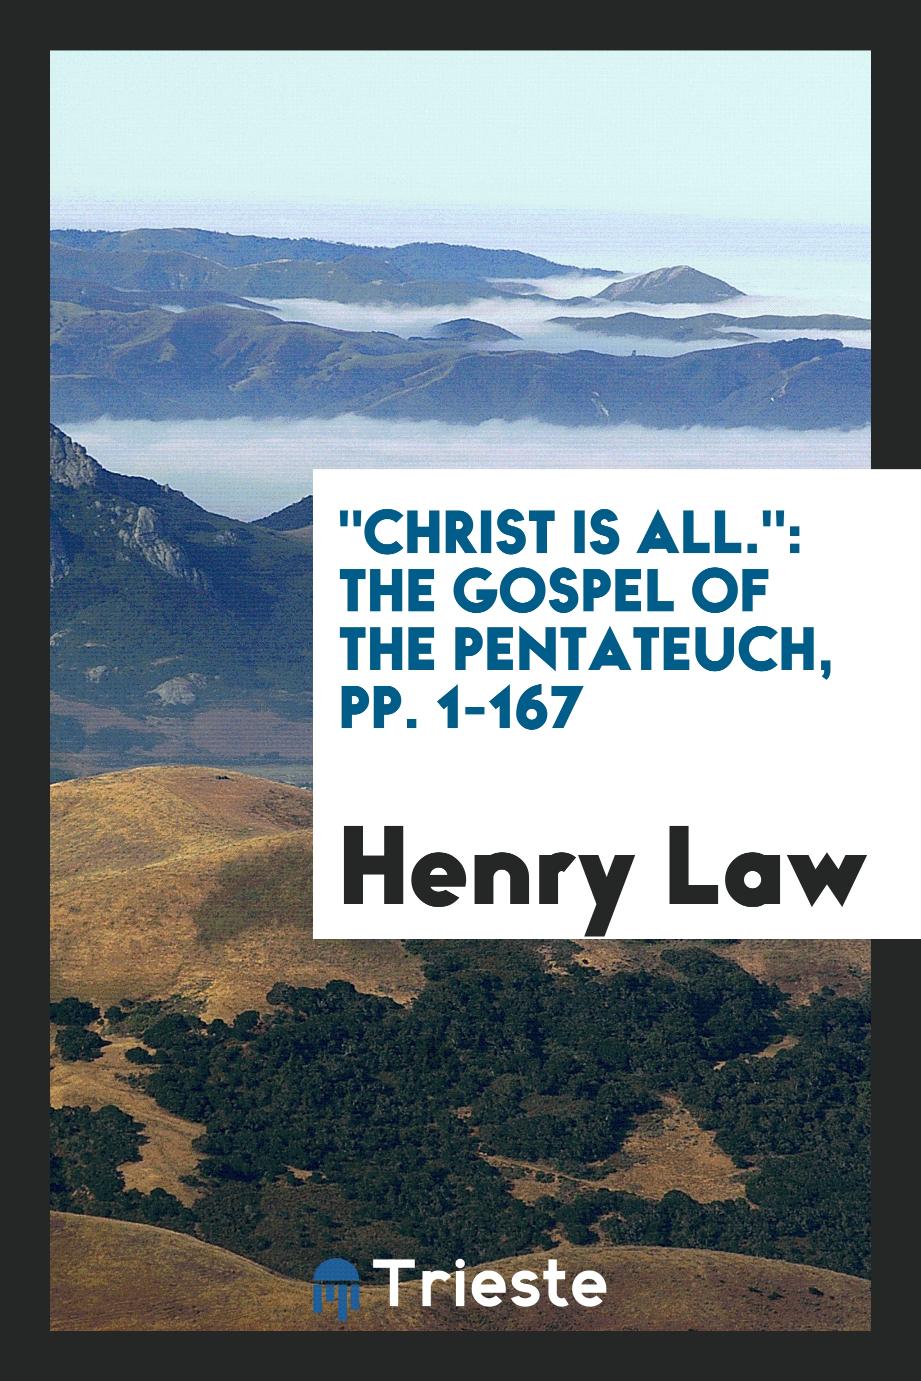 "Christ Is All.": The Gospel of the Pentateuch, pp. 1-167